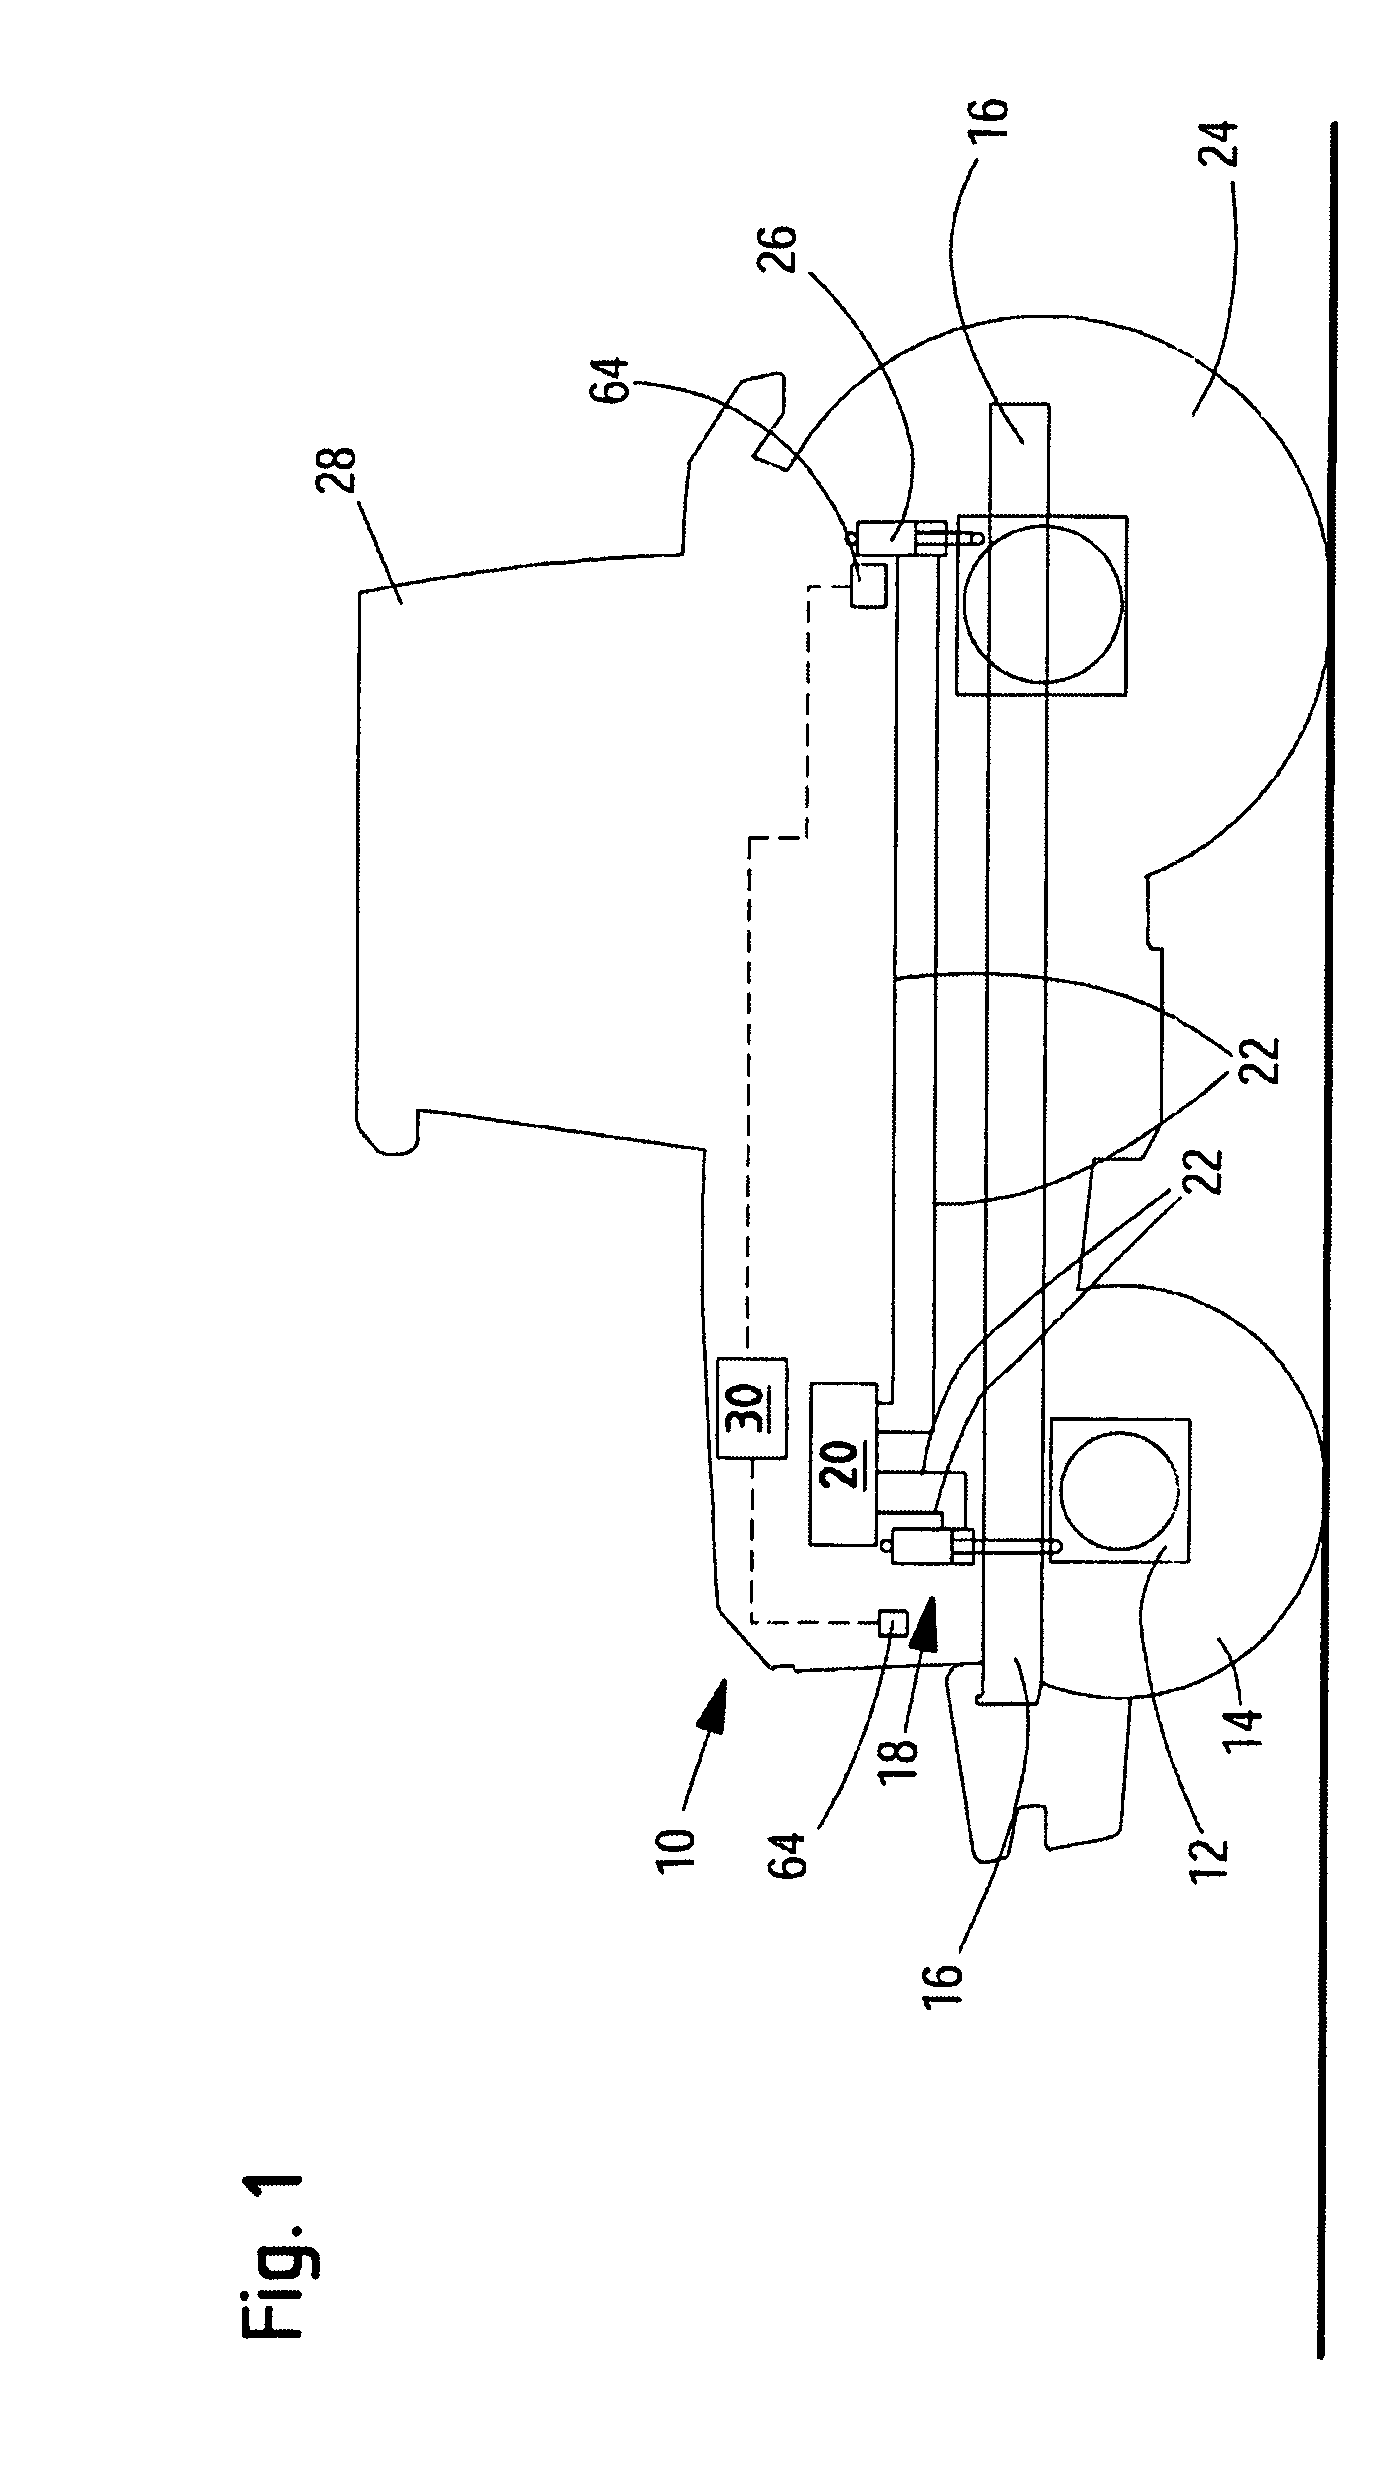 Vehicle active suspension system